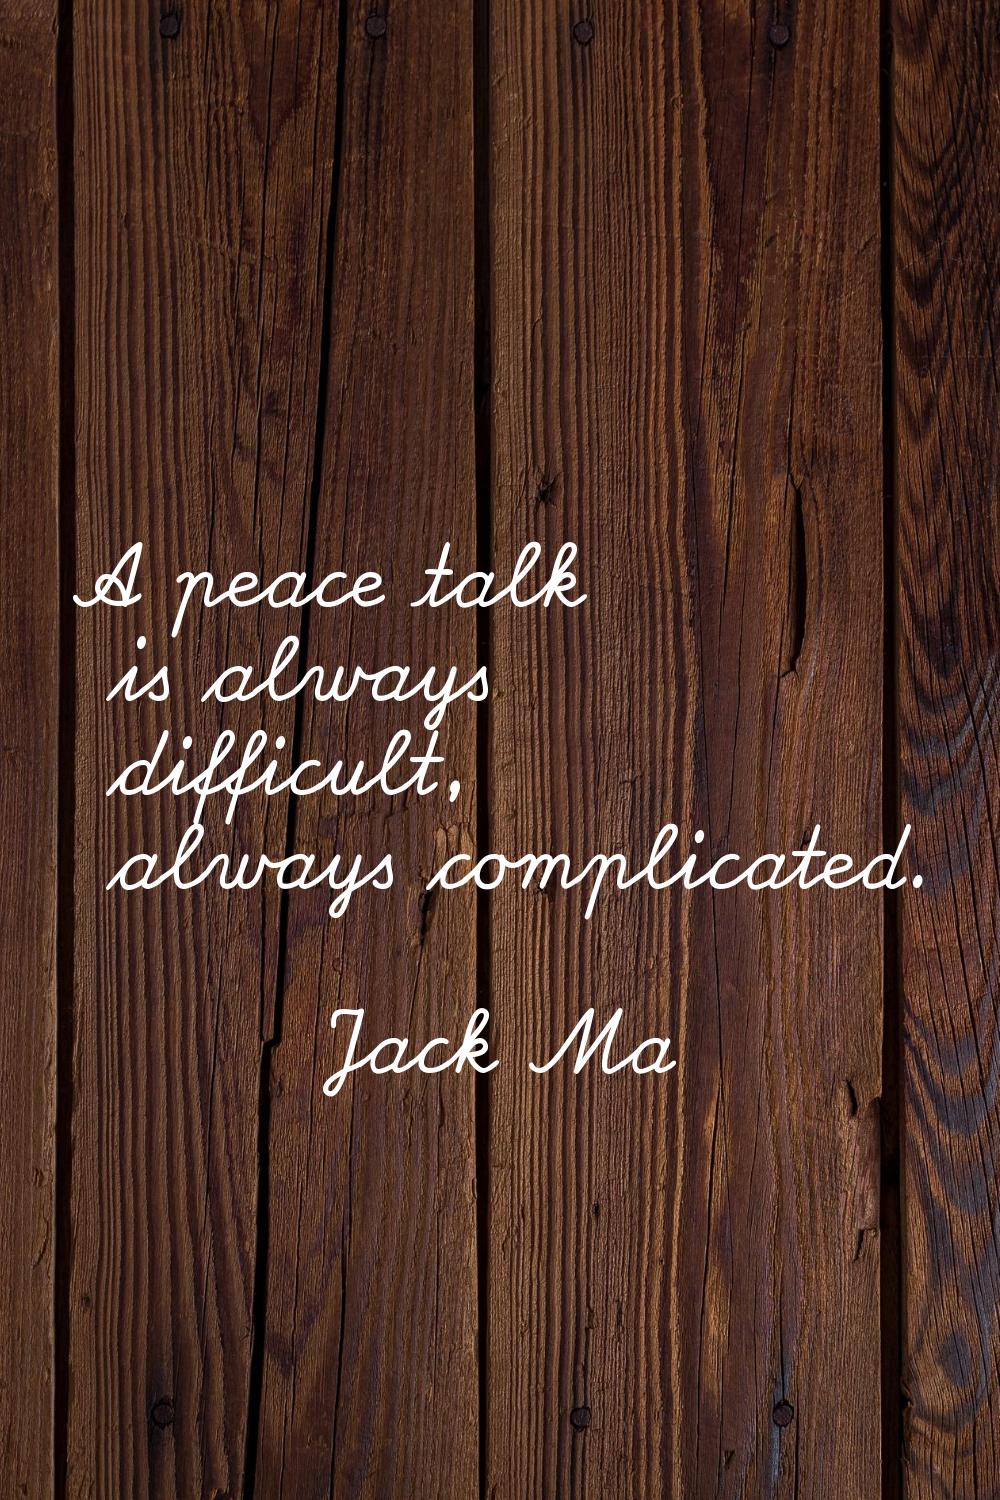 A peace talk is always difficult, always complicated.